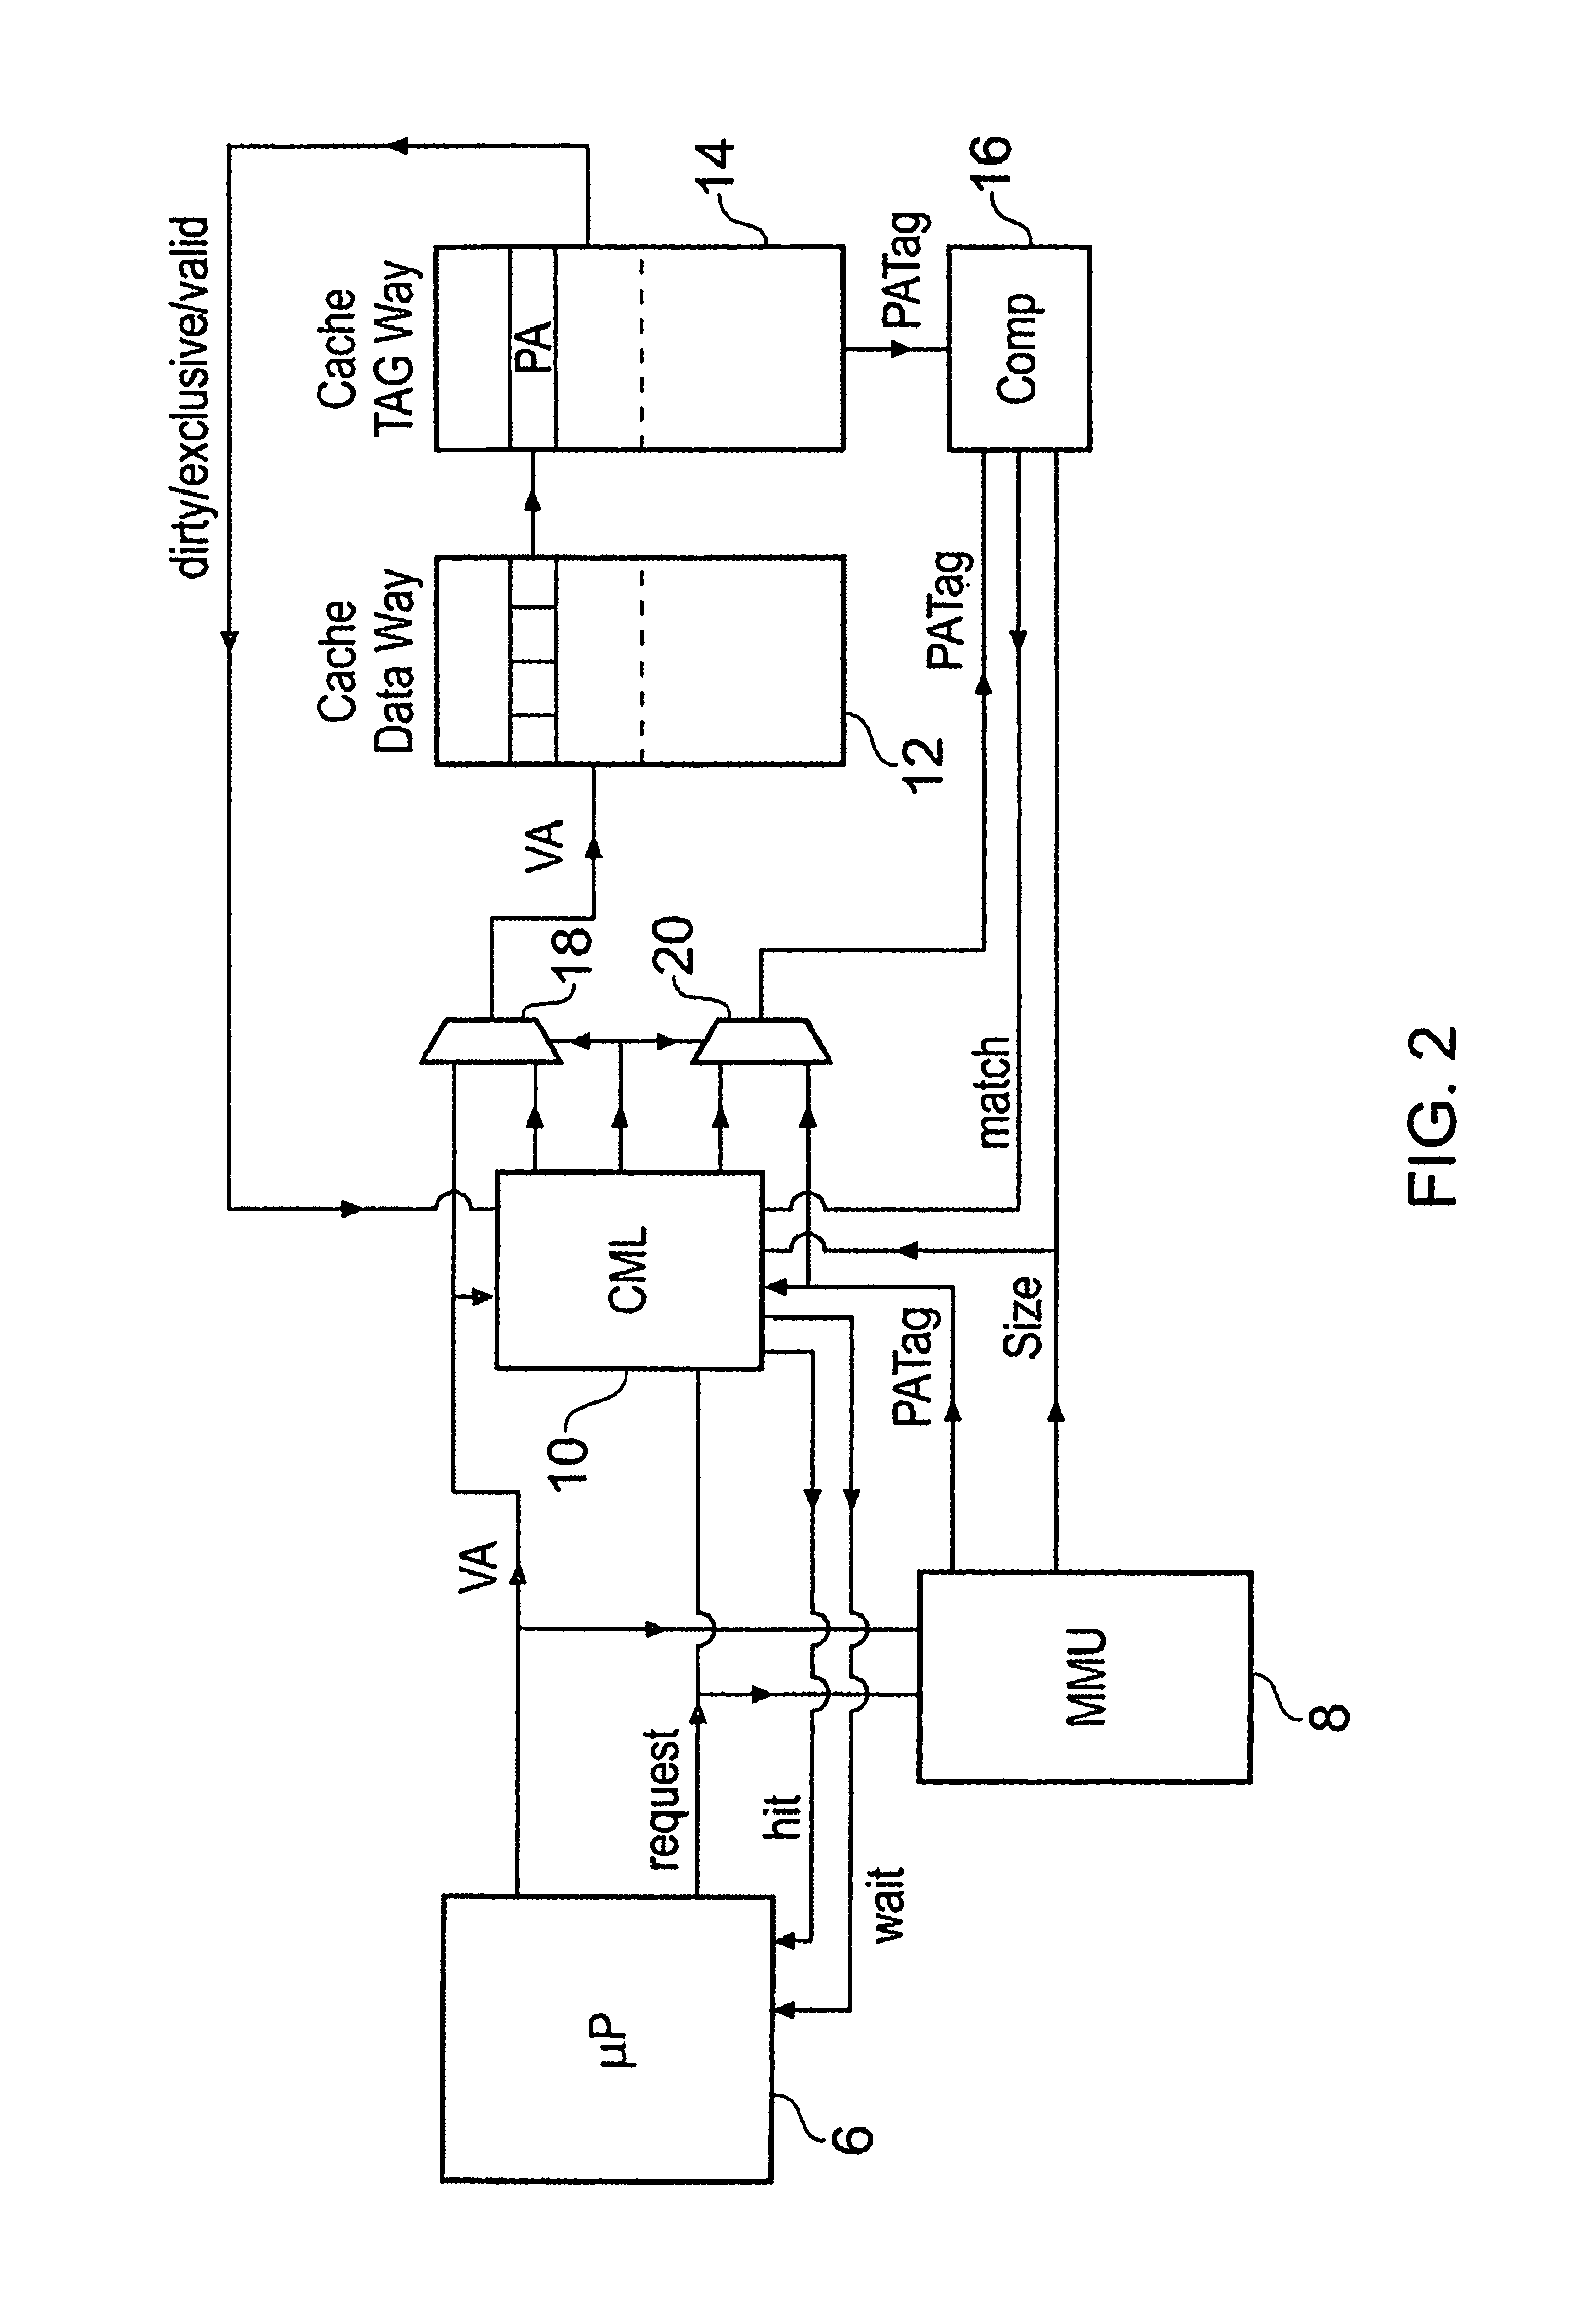 Alias management within a virtually indexed and physically tagged cache memory